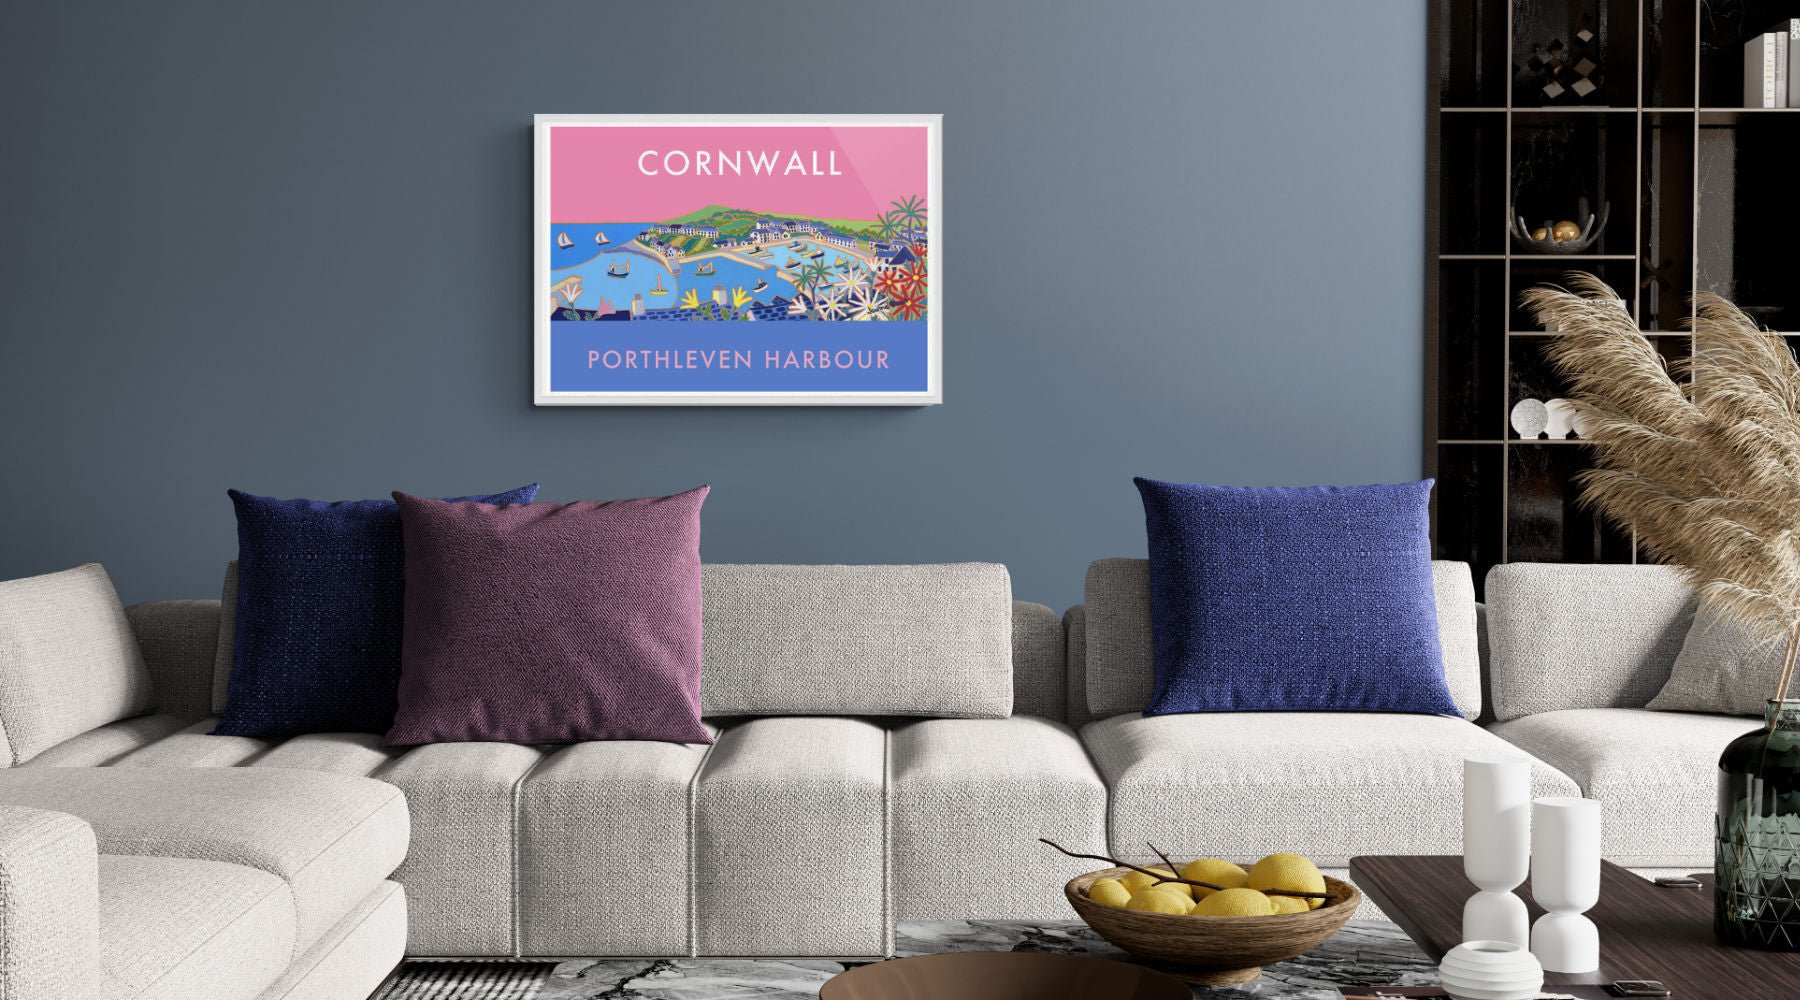 How to choose the perfect artists posters for your home decor